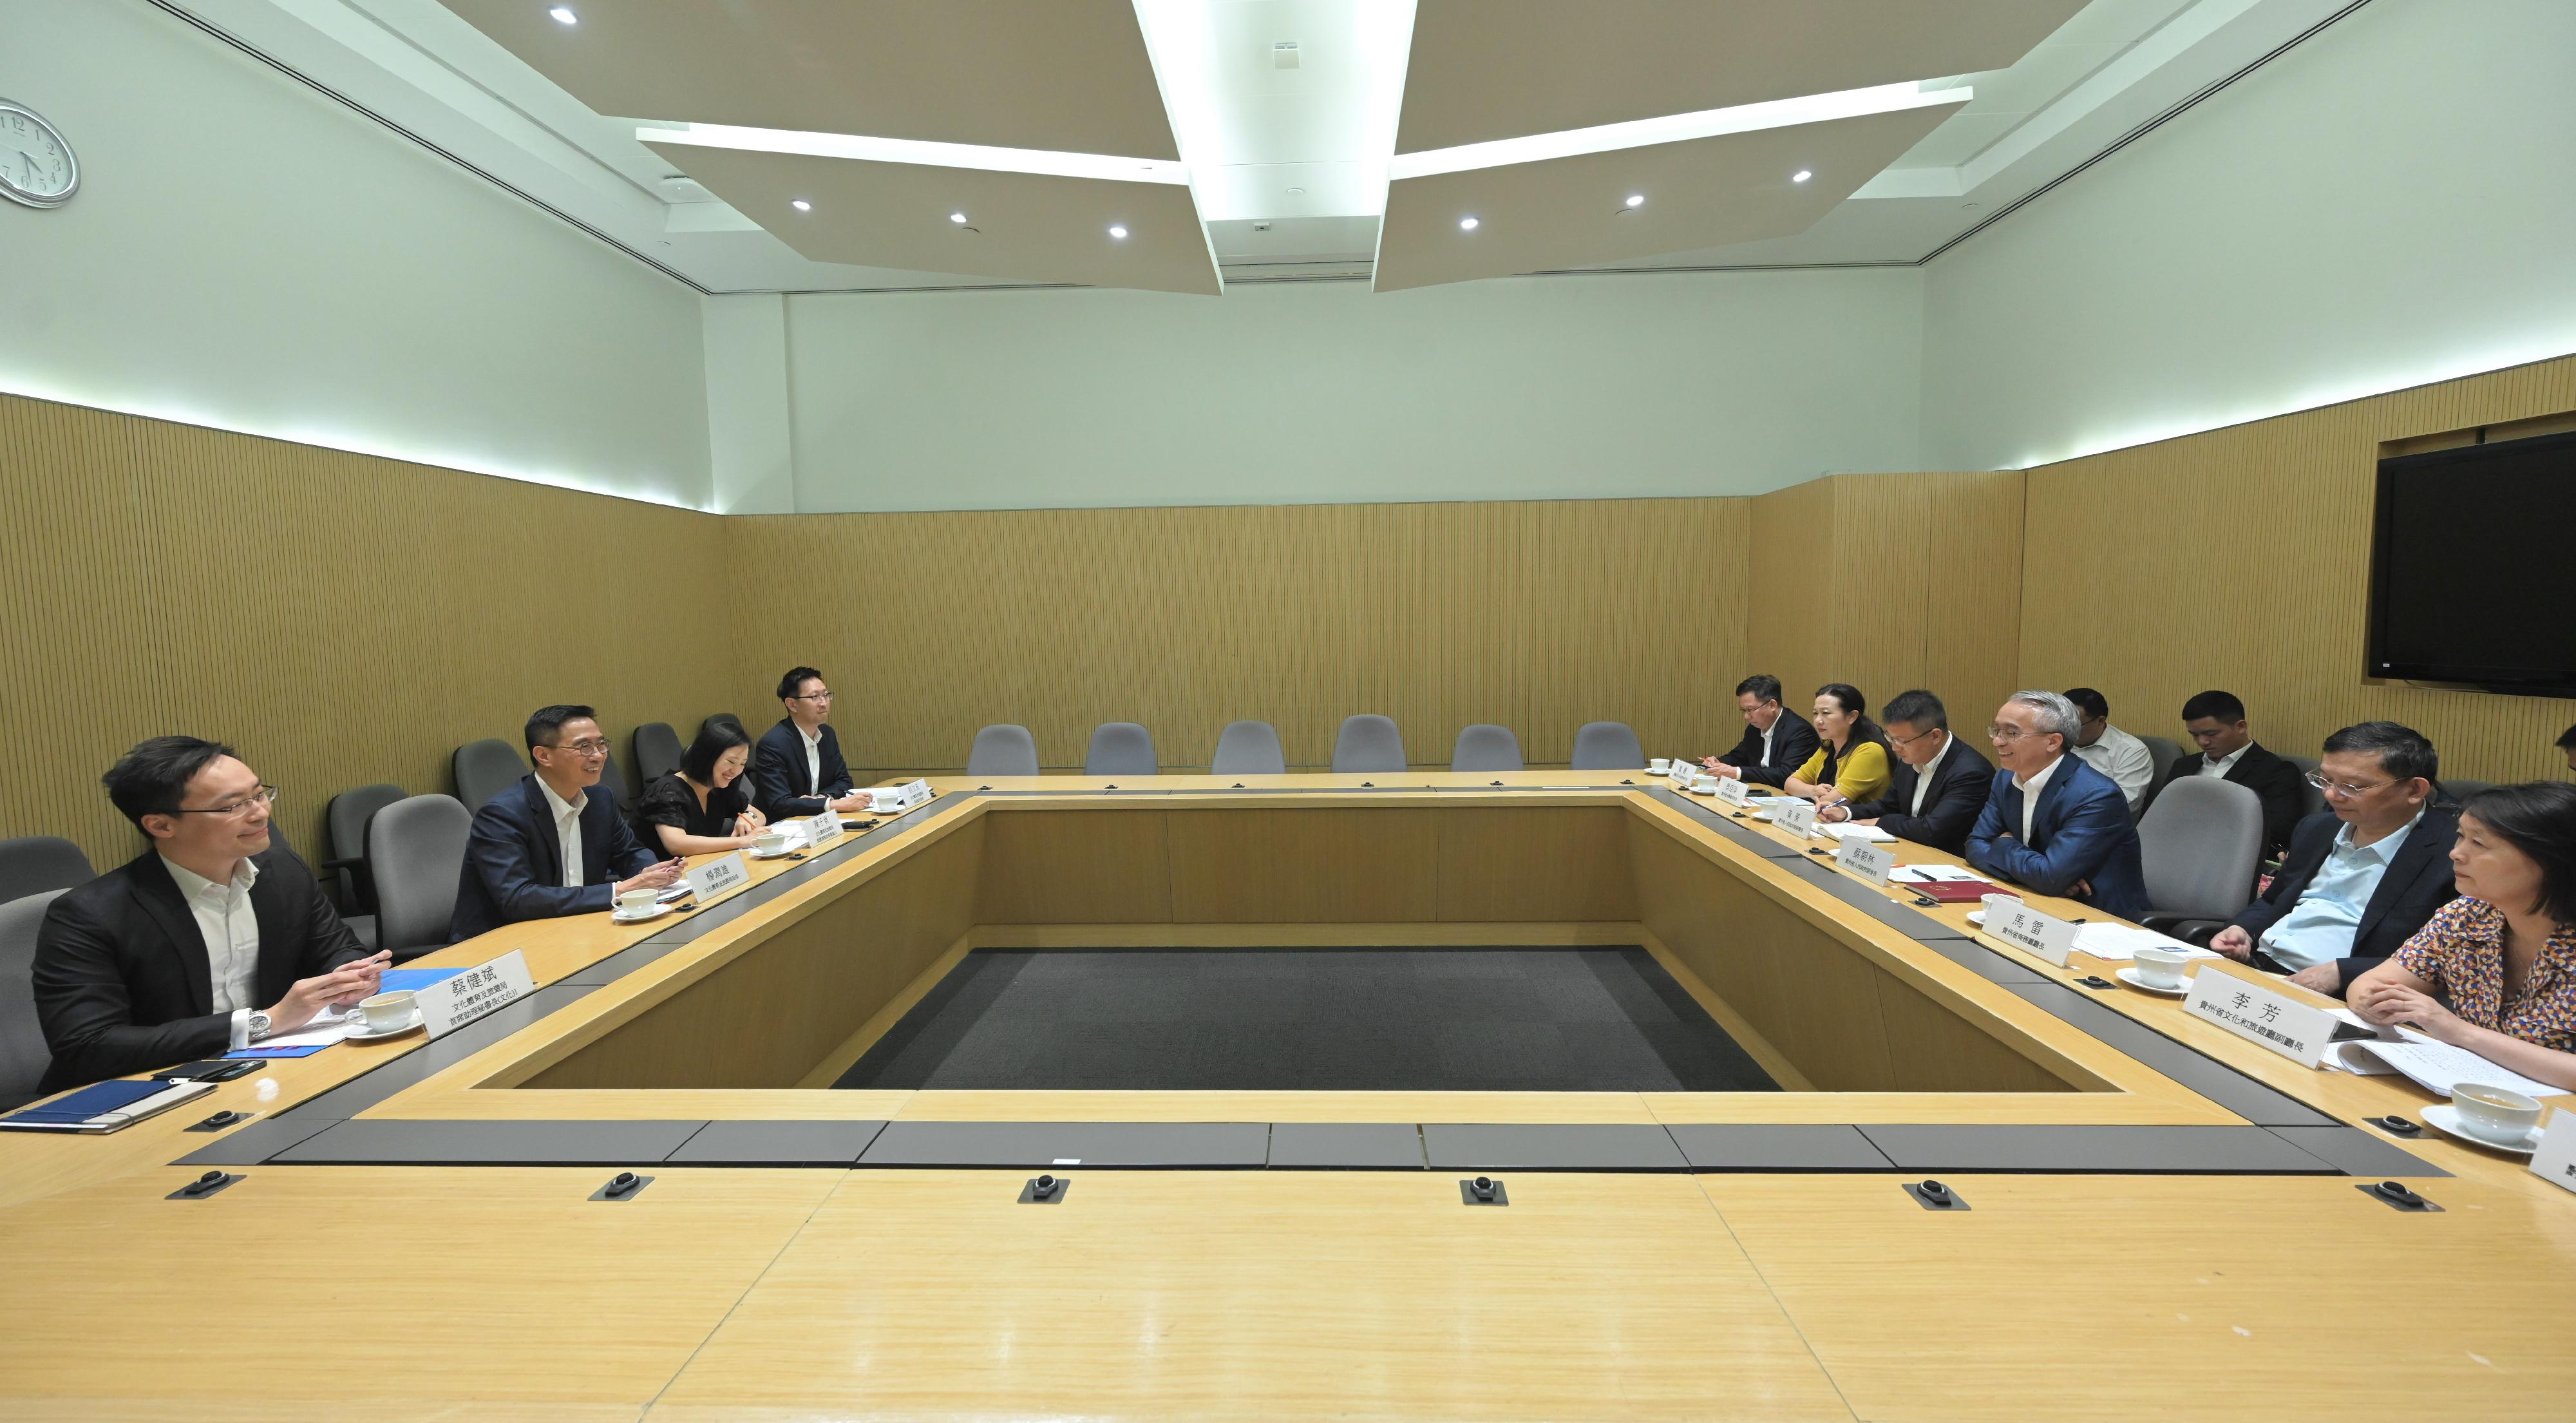 The Secretary for Culture, Sports and Tourism, Mr Kevin Yeung (second left), today (August 8) met with Vice Governor of the Guizhou Provincial People's Government Mr Cai Chaolin (third right). Photo shows officials exchanging views on deepening cultural and tourism collaboration between Hong Kong and Guizhou.